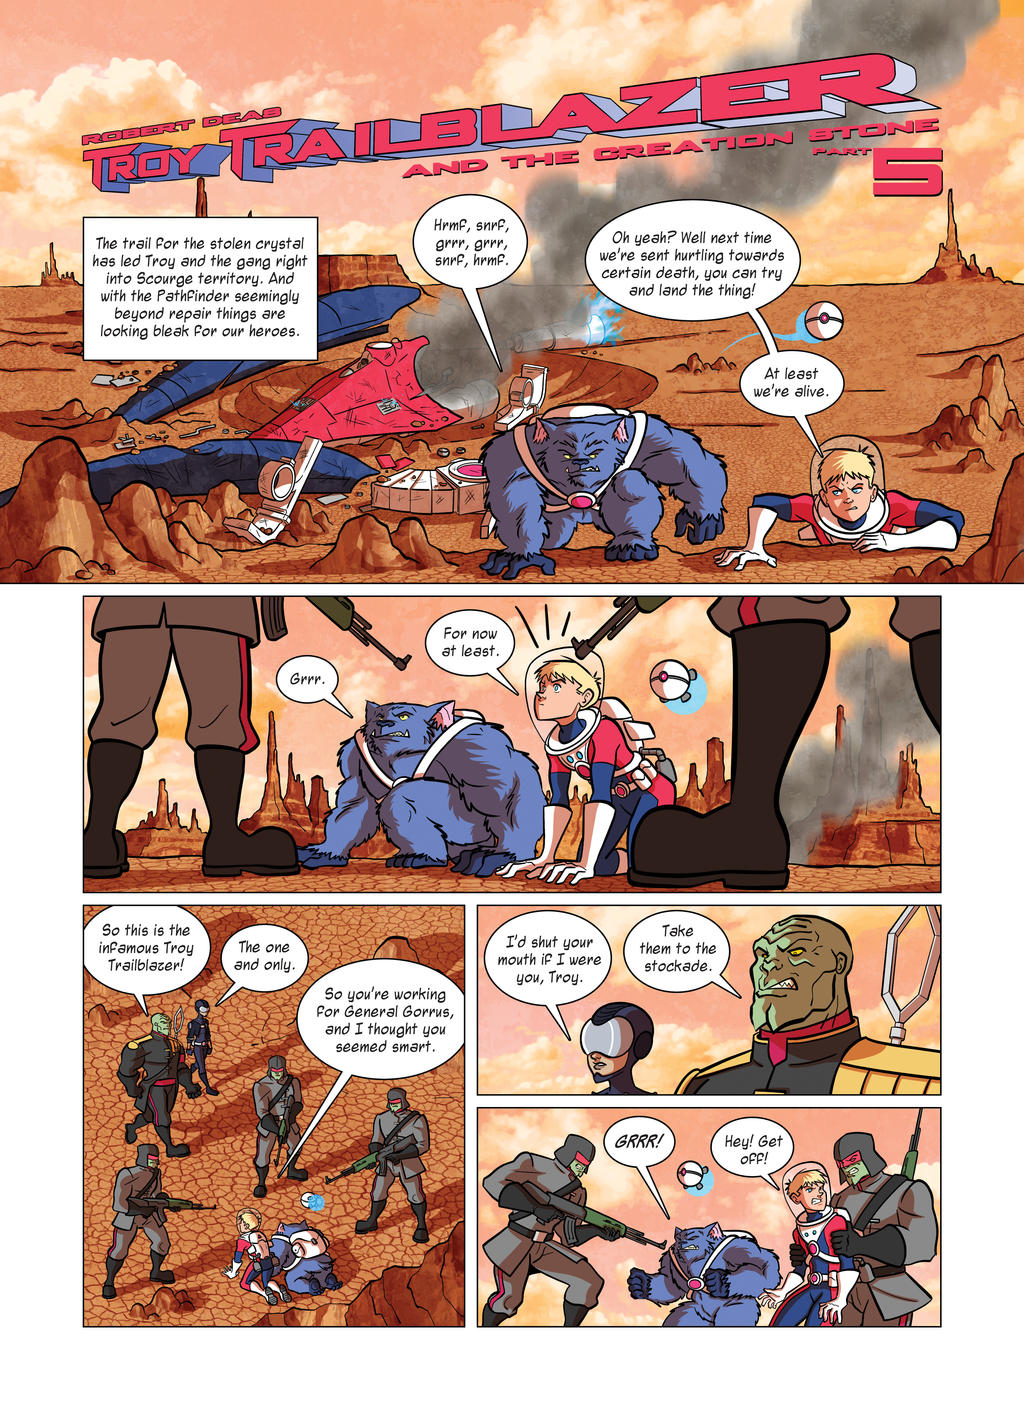 Troy Trailblazer: And The Creation Stone Page 13